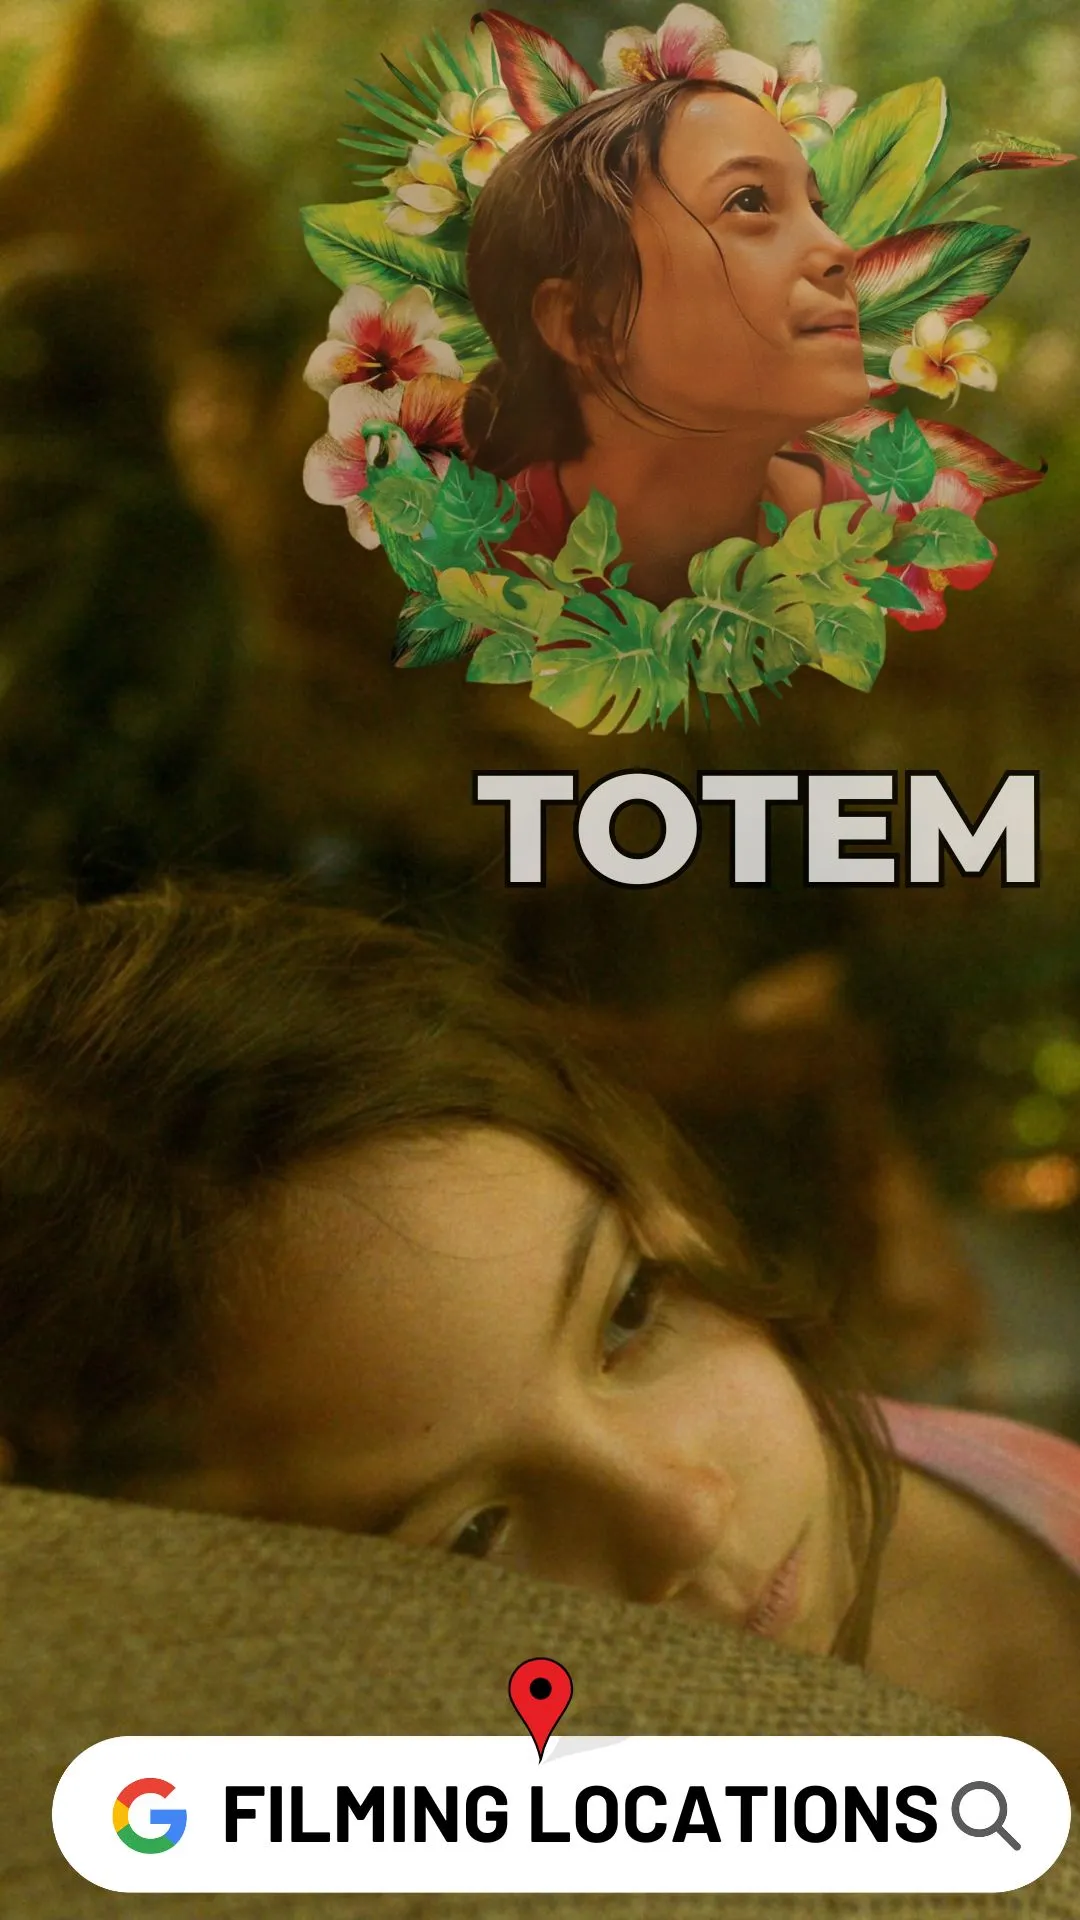 Totem Filming Locations